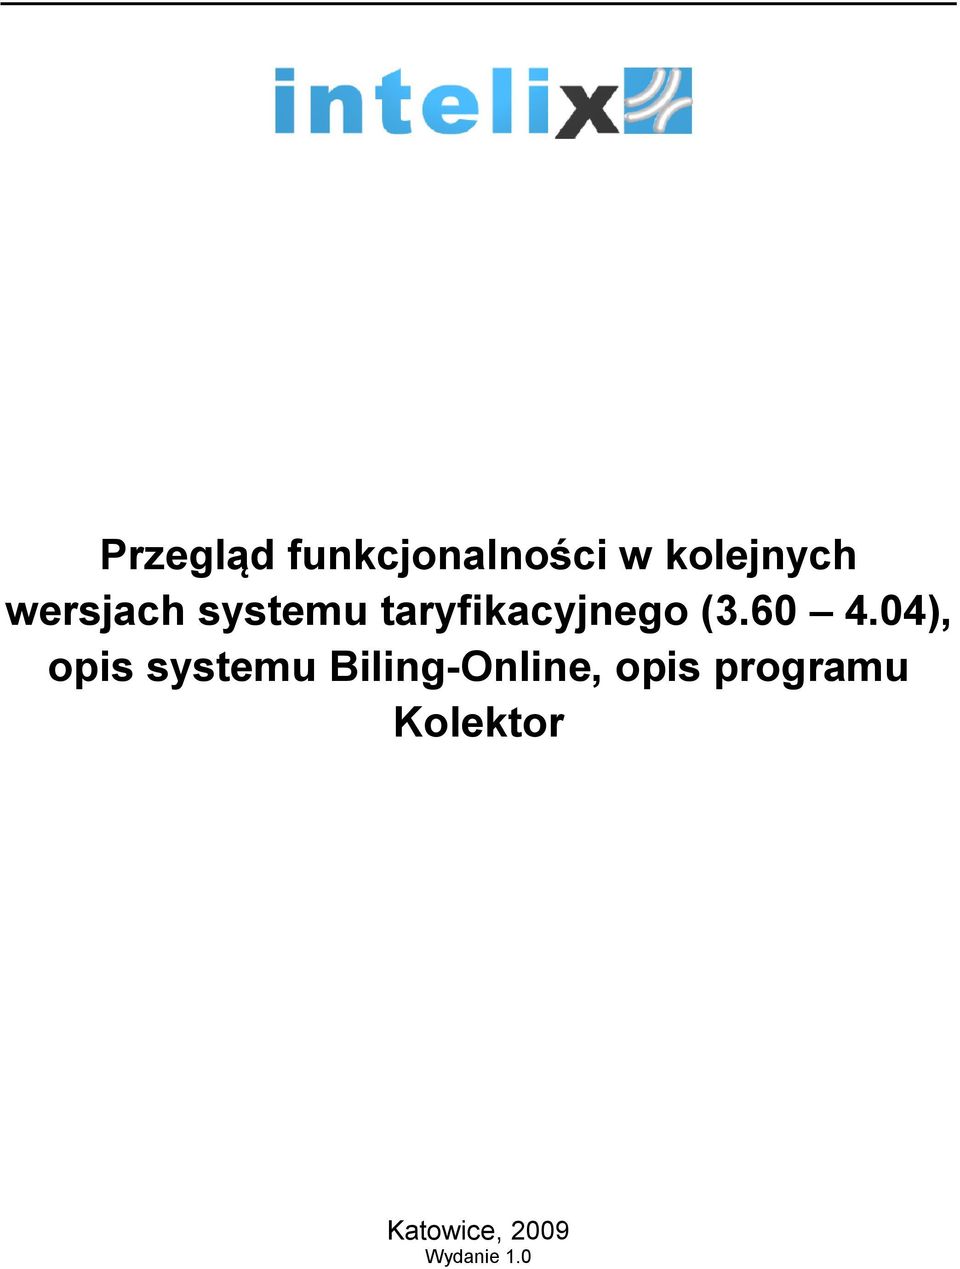 60 4.04), pis systemu Biling-Online,